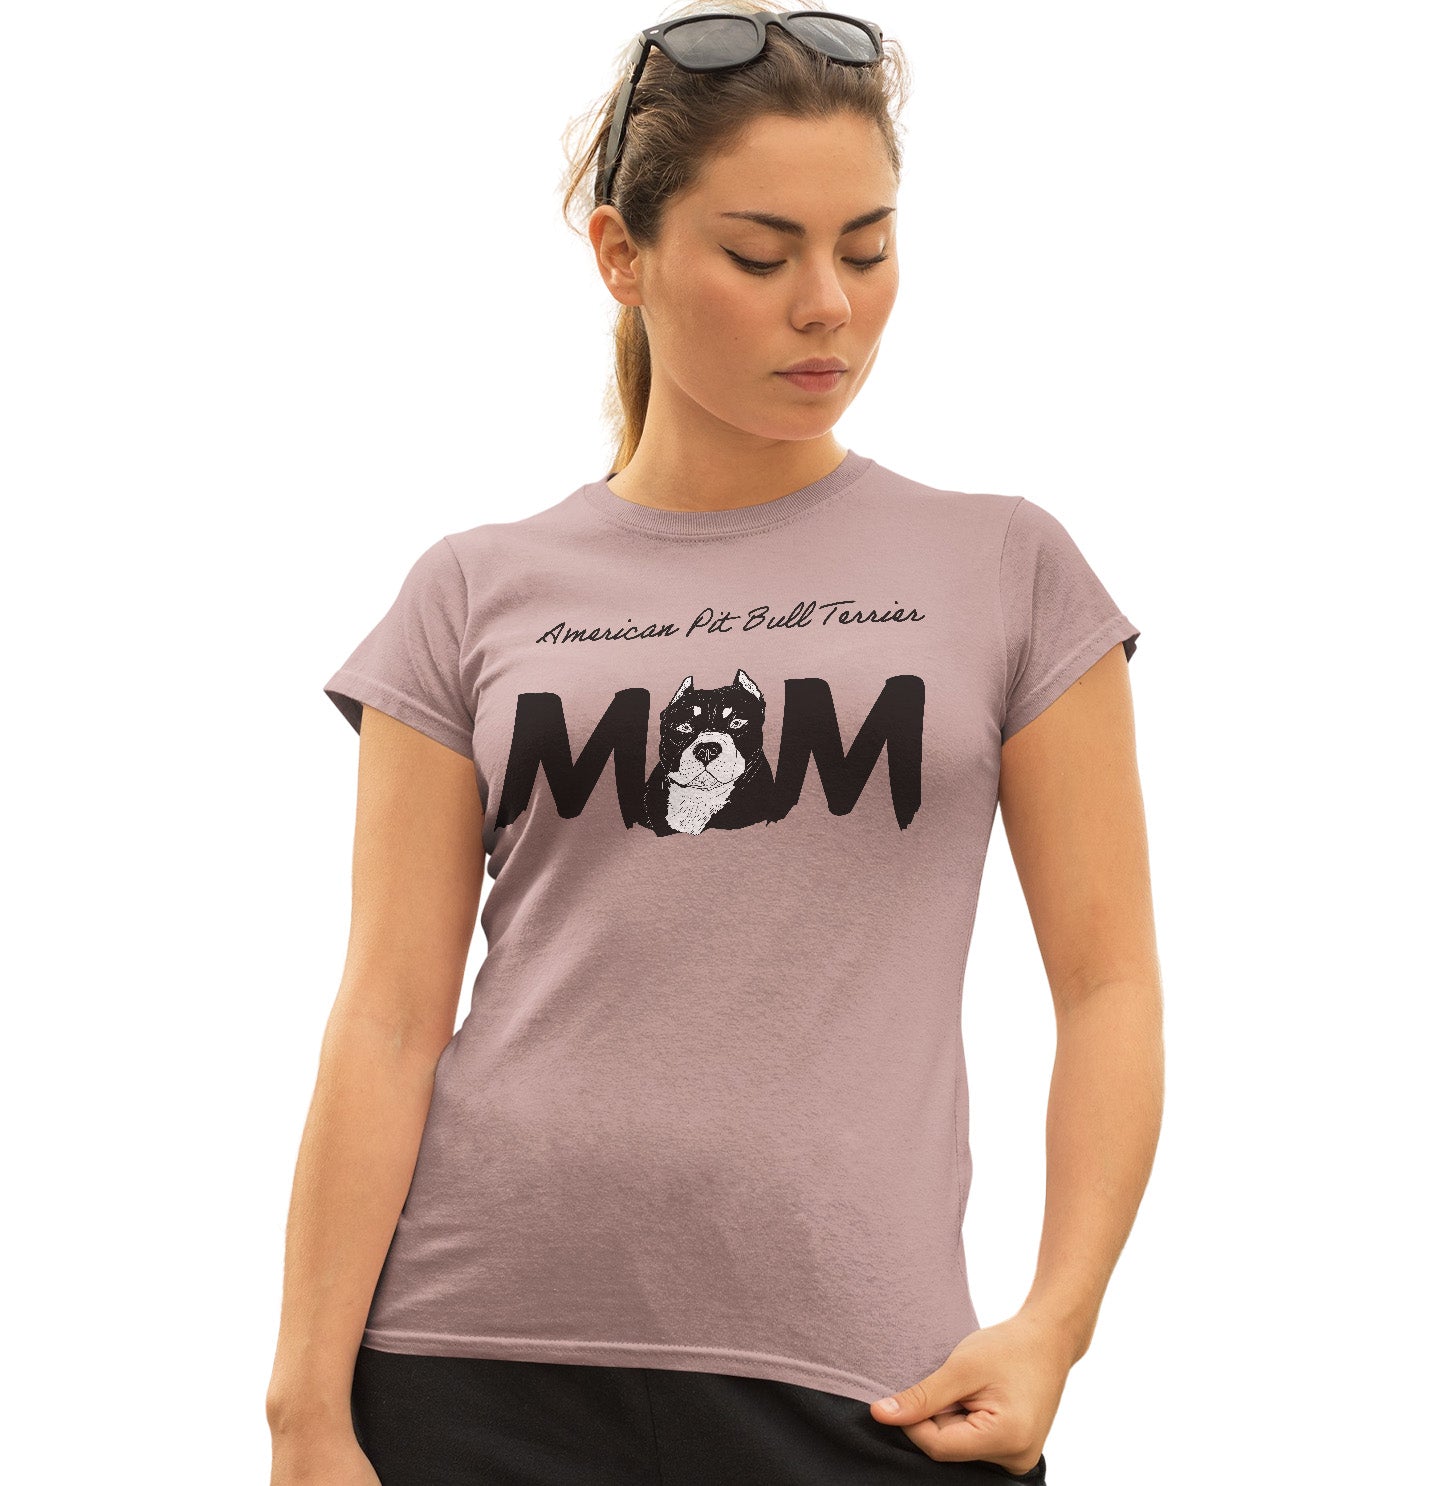 American Pit Bull Terrier Breed Mom - Women's Fitted T-Shirt